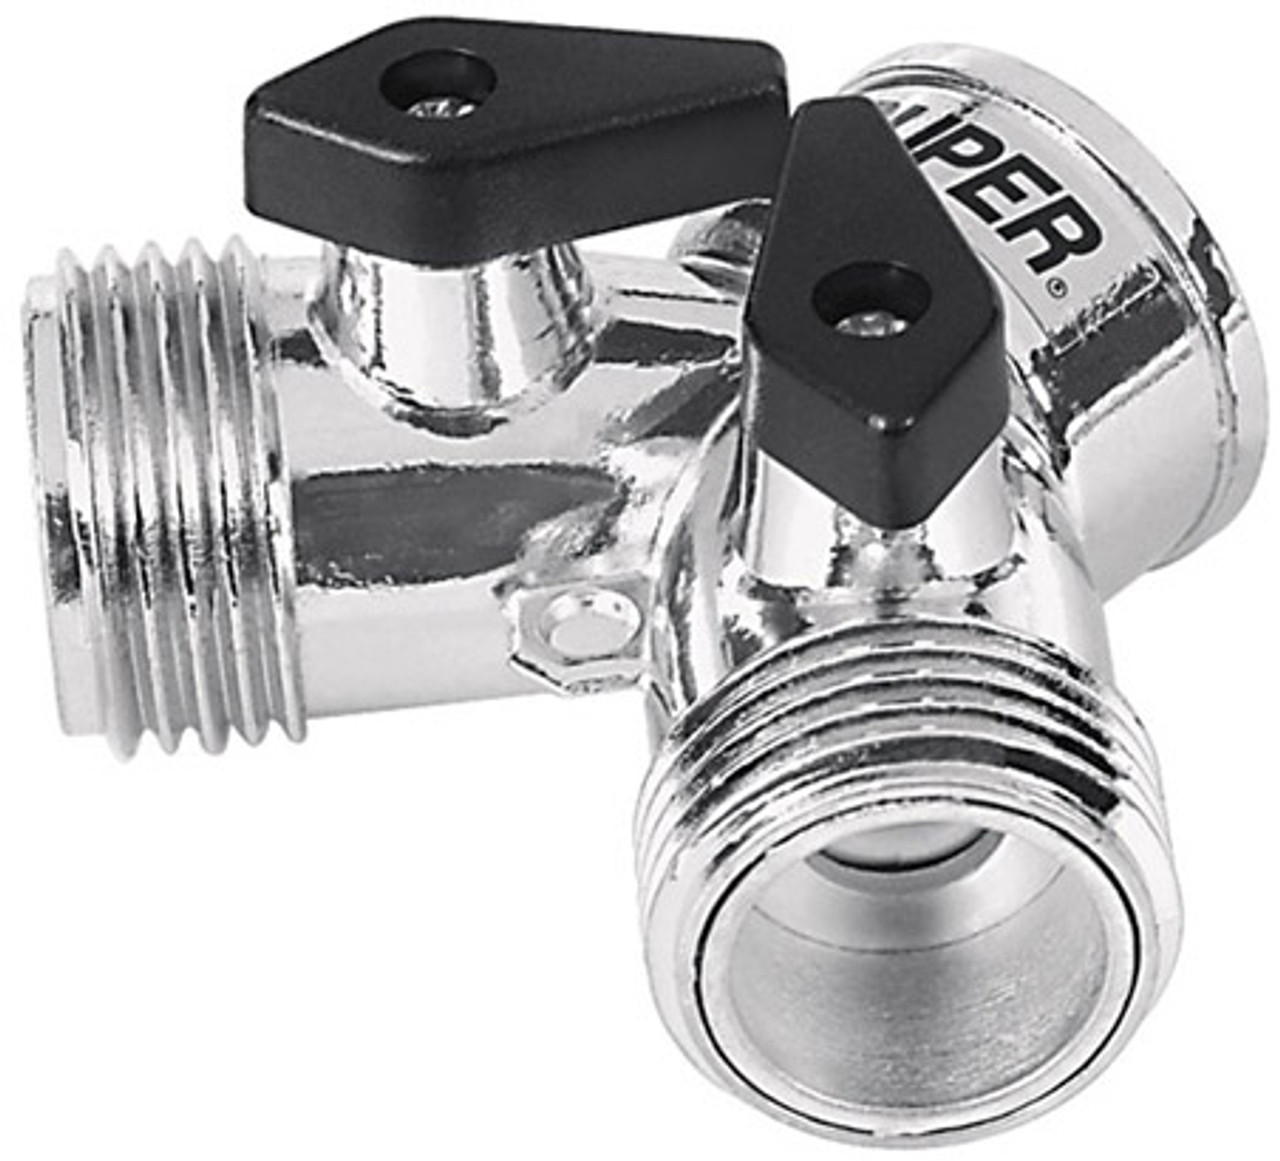 Truper Aluminum "y" Connector With Shut-off #10372-2 Pack